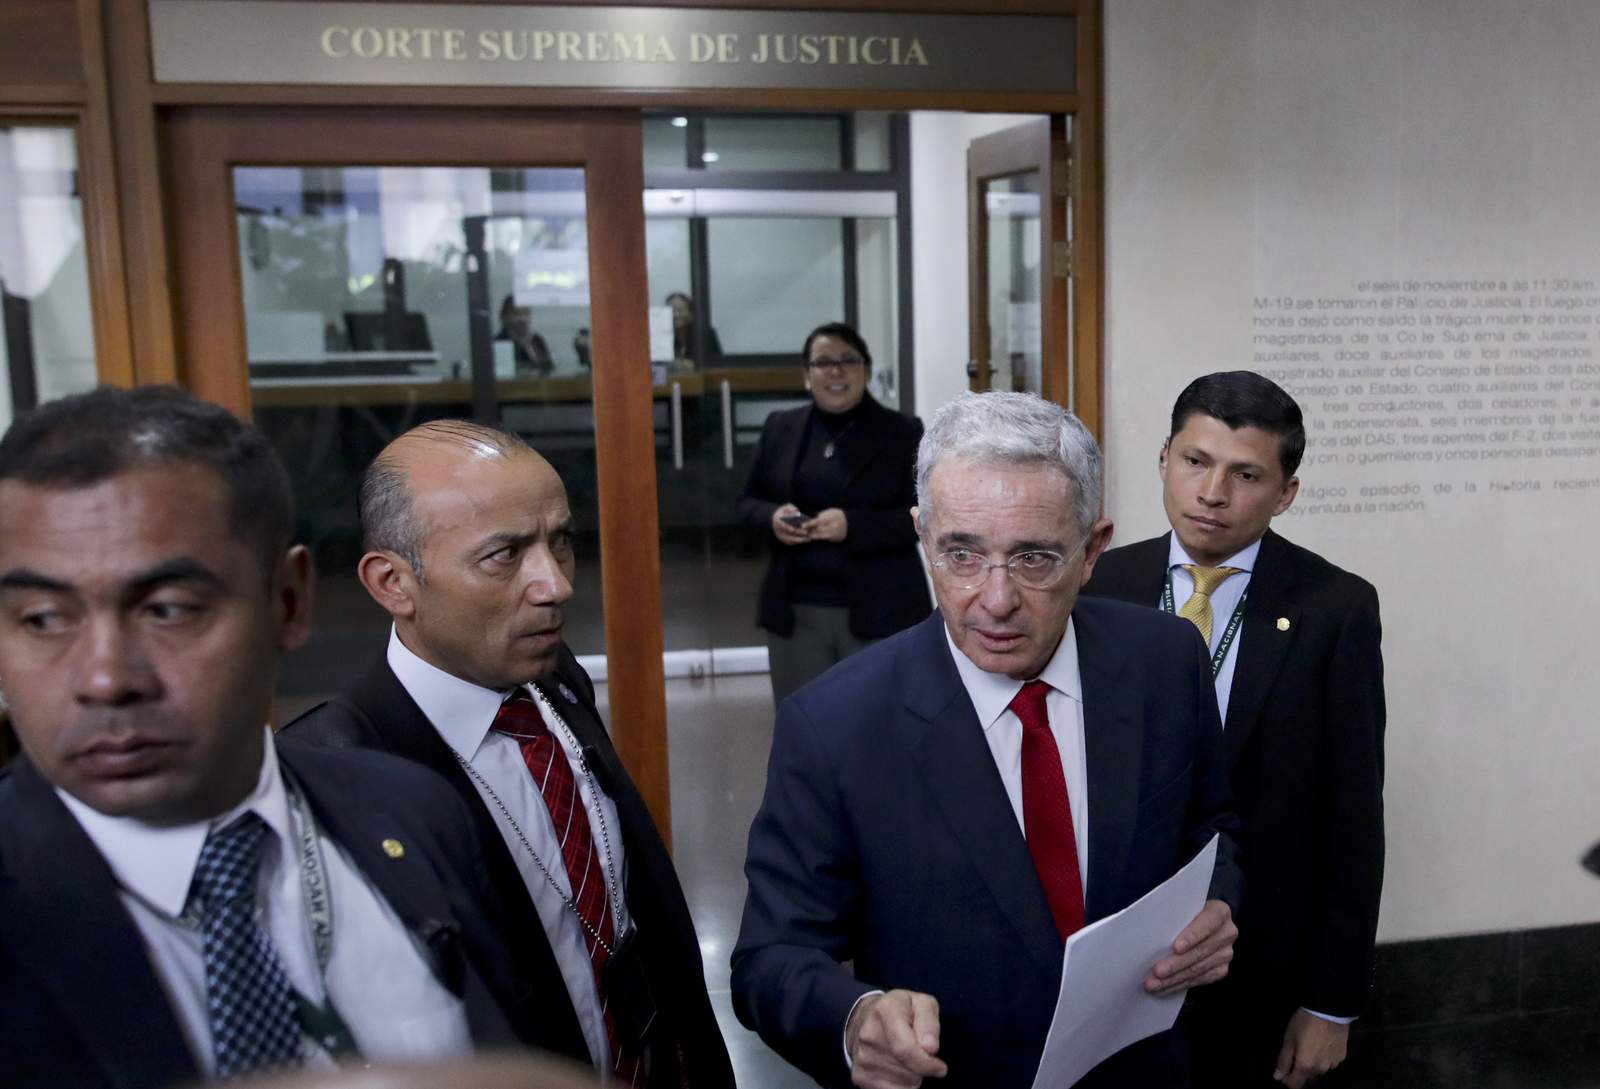 House arrest of Colombia's Uribe exposes post-peace tensions